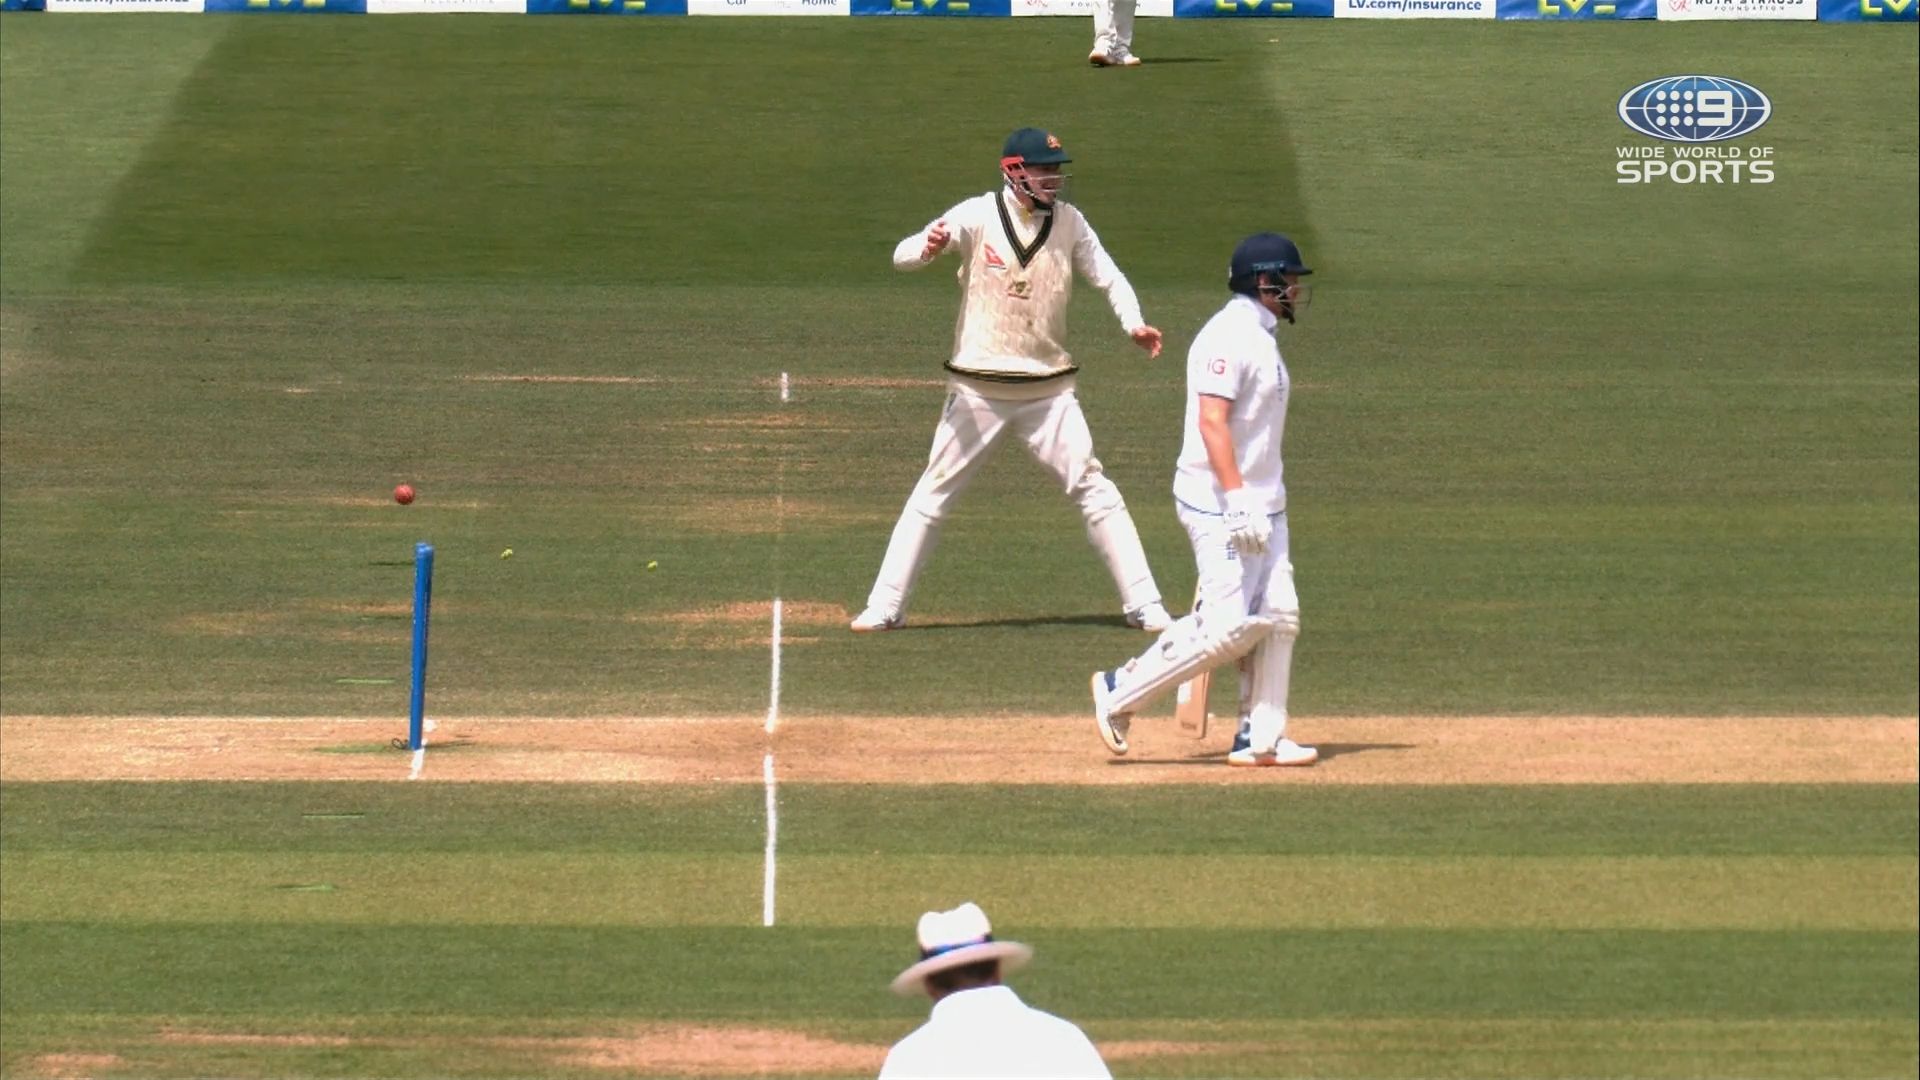 'I'd do it again': Alex Carey shows no remorse after controversial Jonny Bairstow stumping